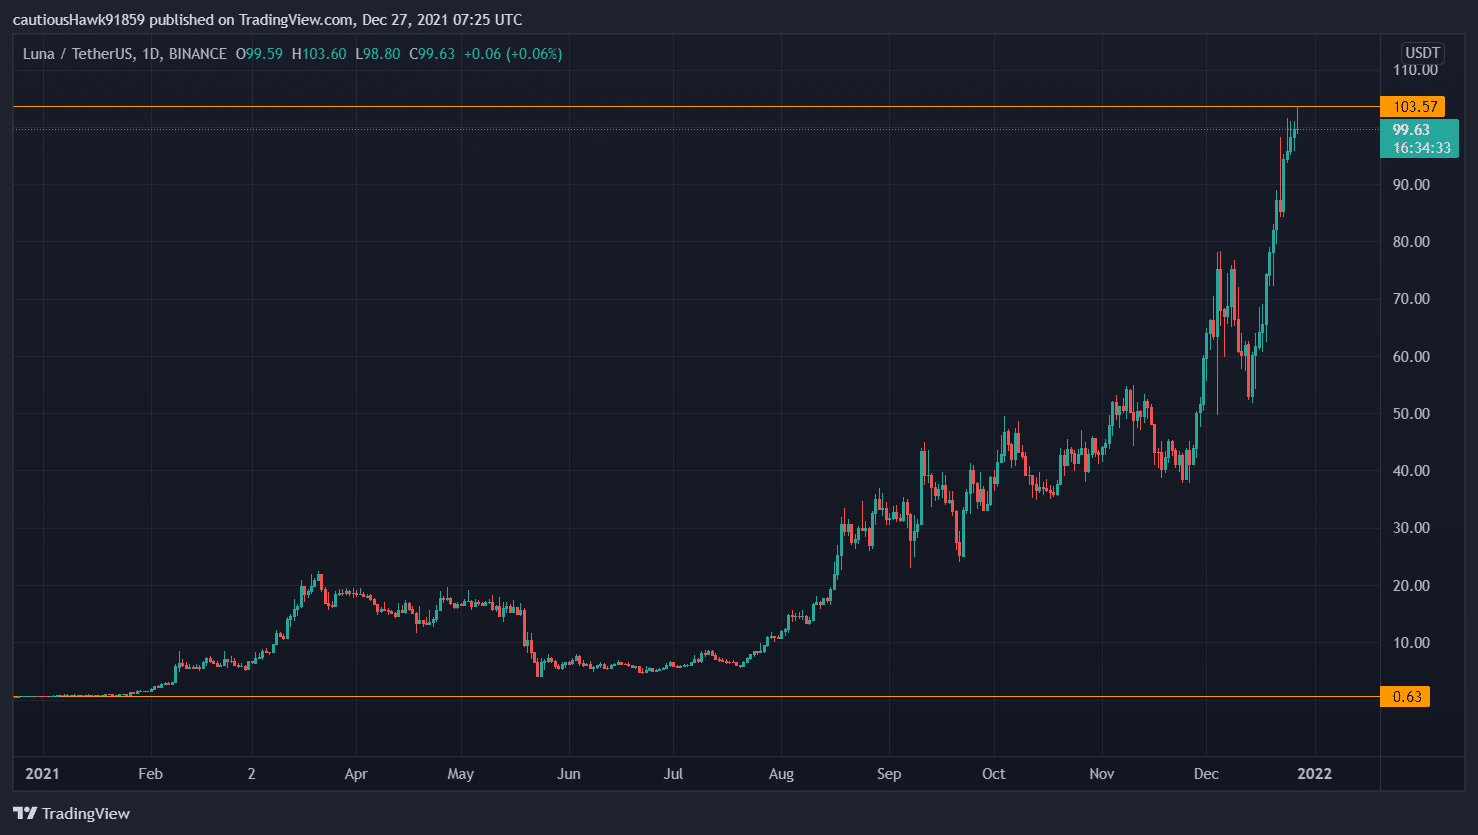 LUNA's price rise over the year - Source: TradingView, LUNA/USDT